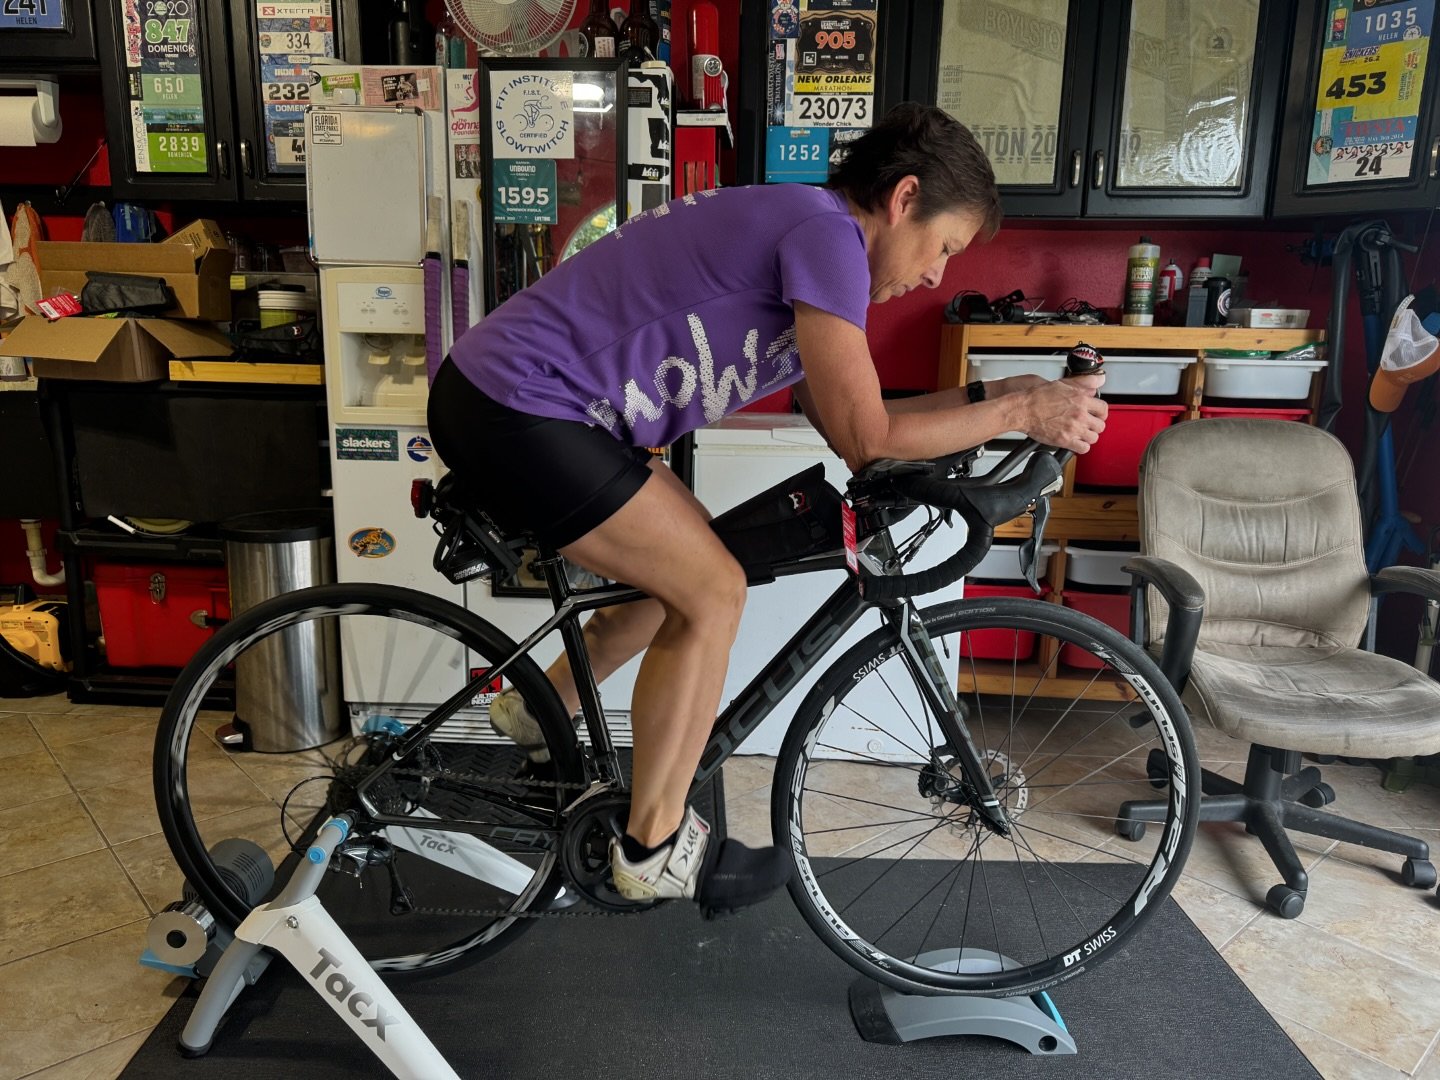 Here&rsquo;s Gail. Gail has been riding for years and rides 50 miles 2x a week. She was never comfortable though on her bike. She decided to come see #coachdom for a #bikefit and now she just rode 65 miles incredibly comfortable and ran 10 miles righ